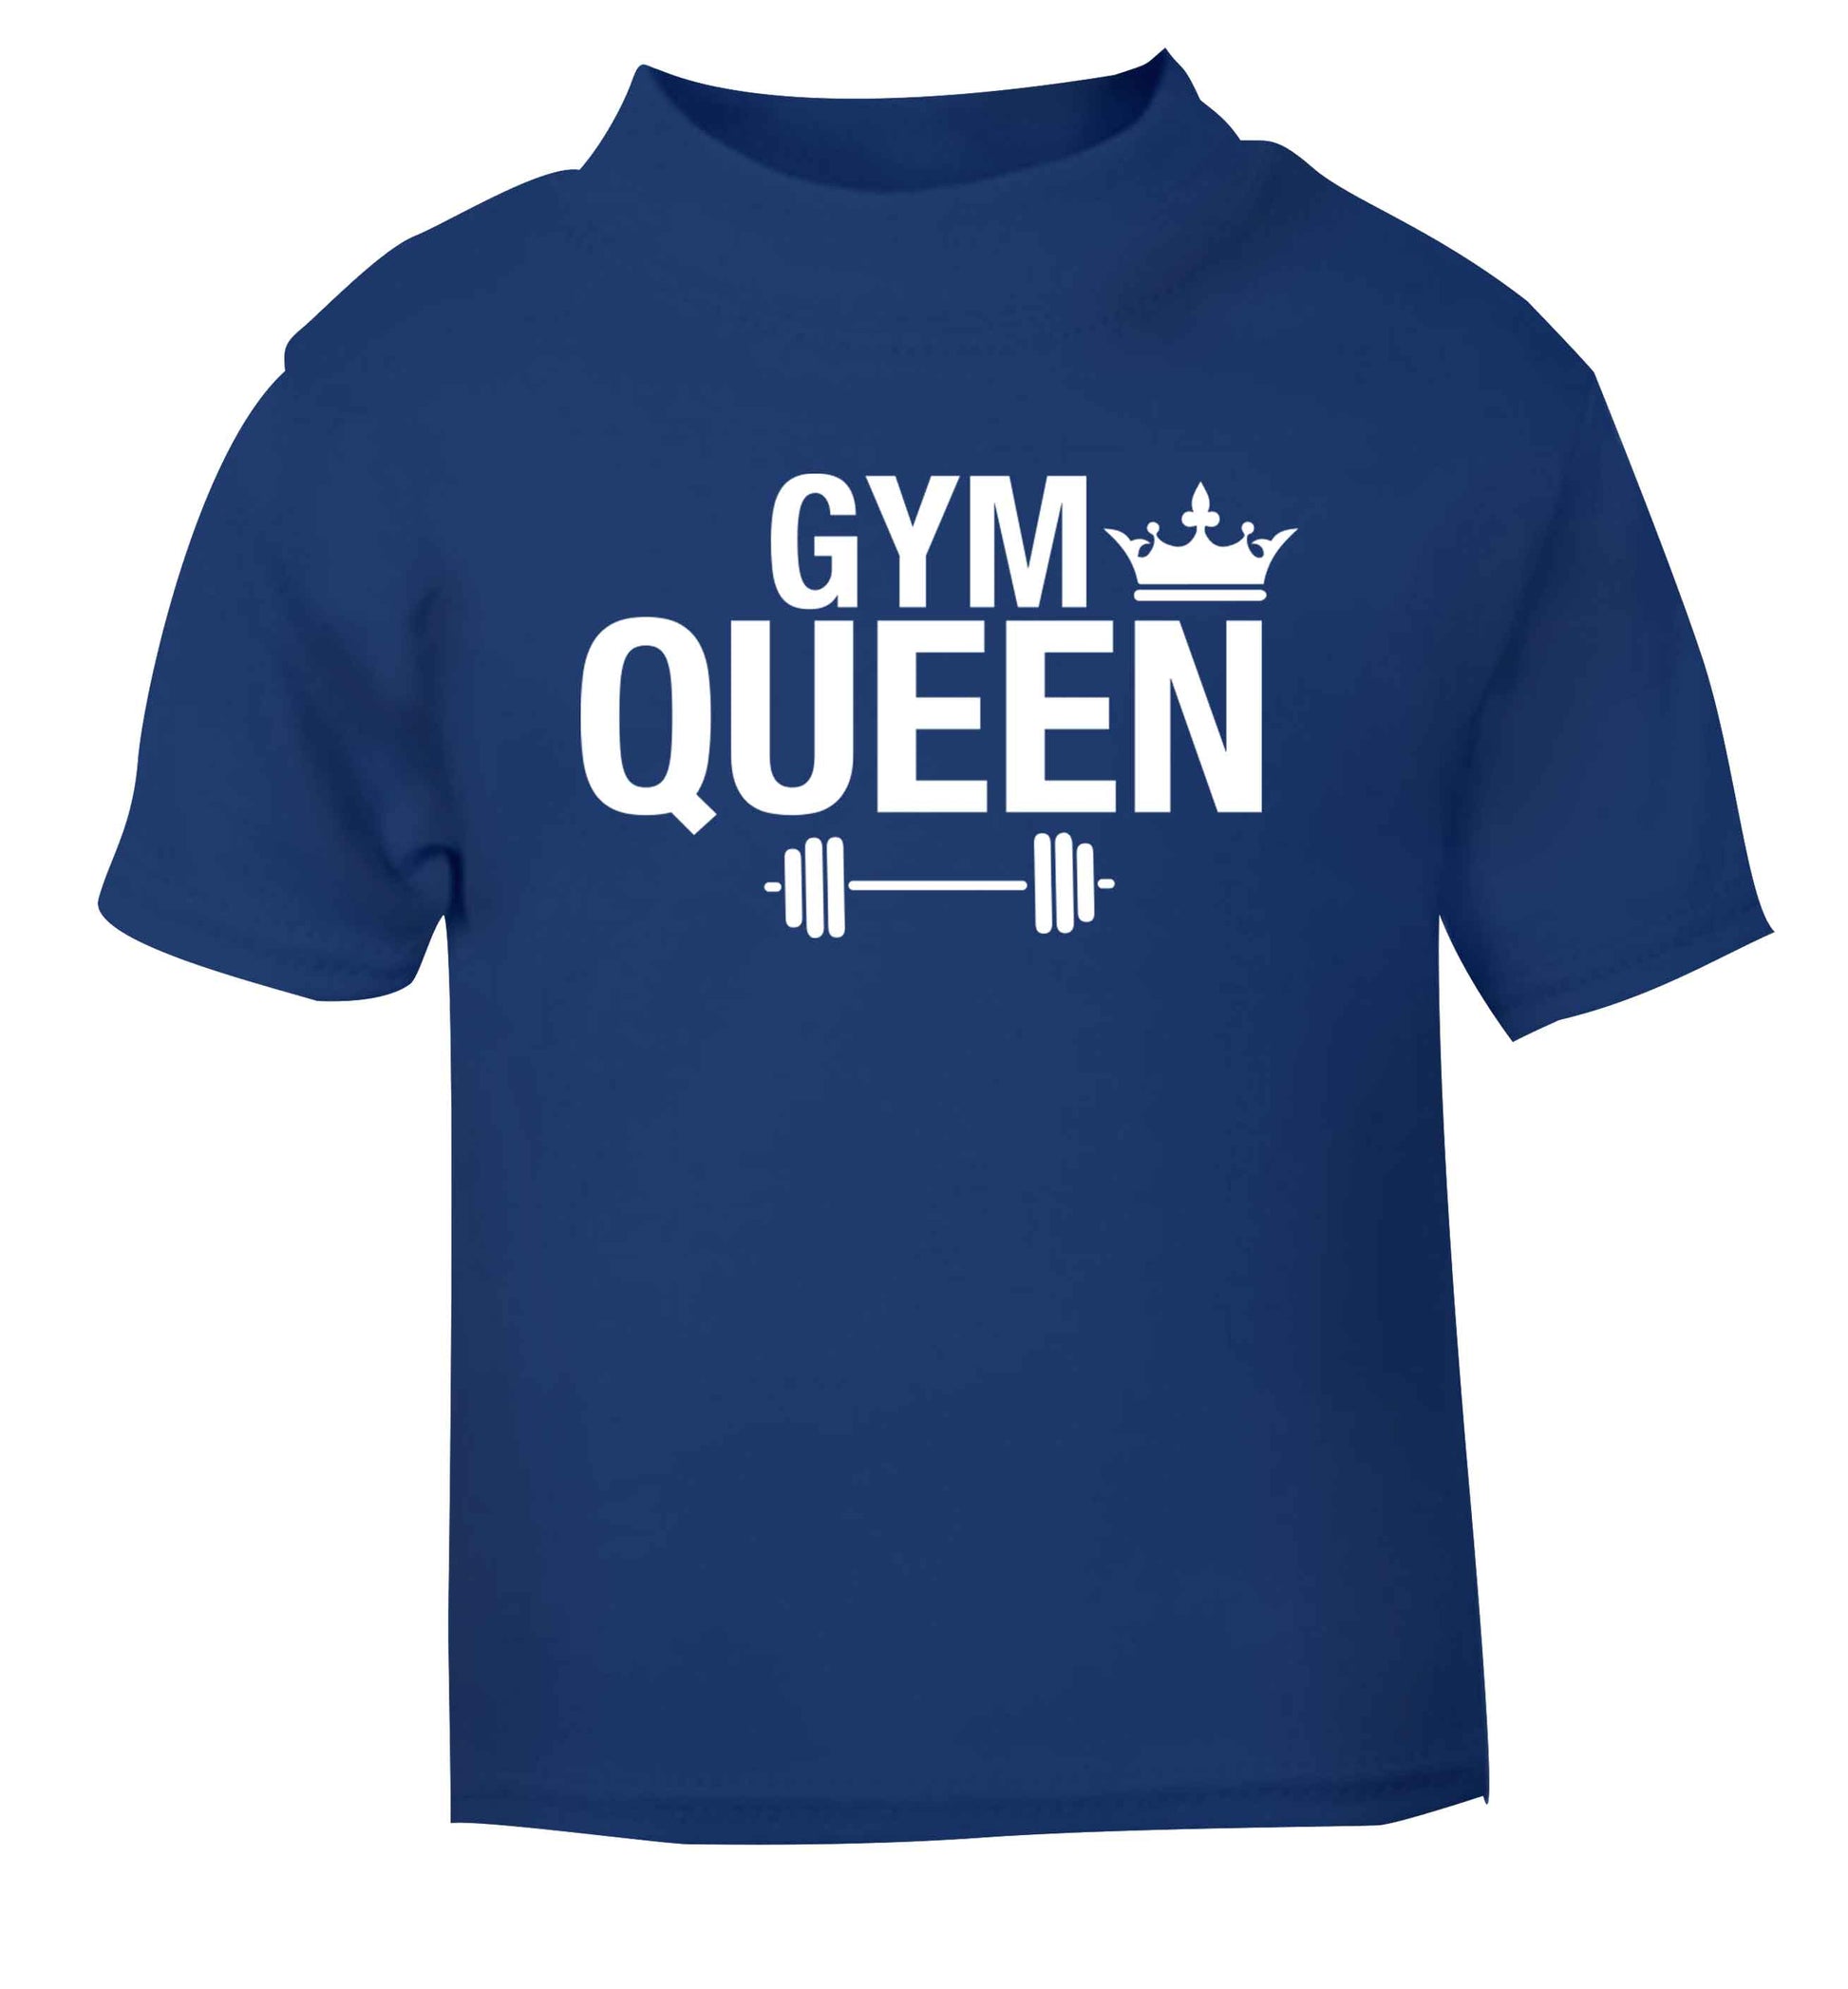 Gym queen blue Baby Toddler Tshirt 2 Years